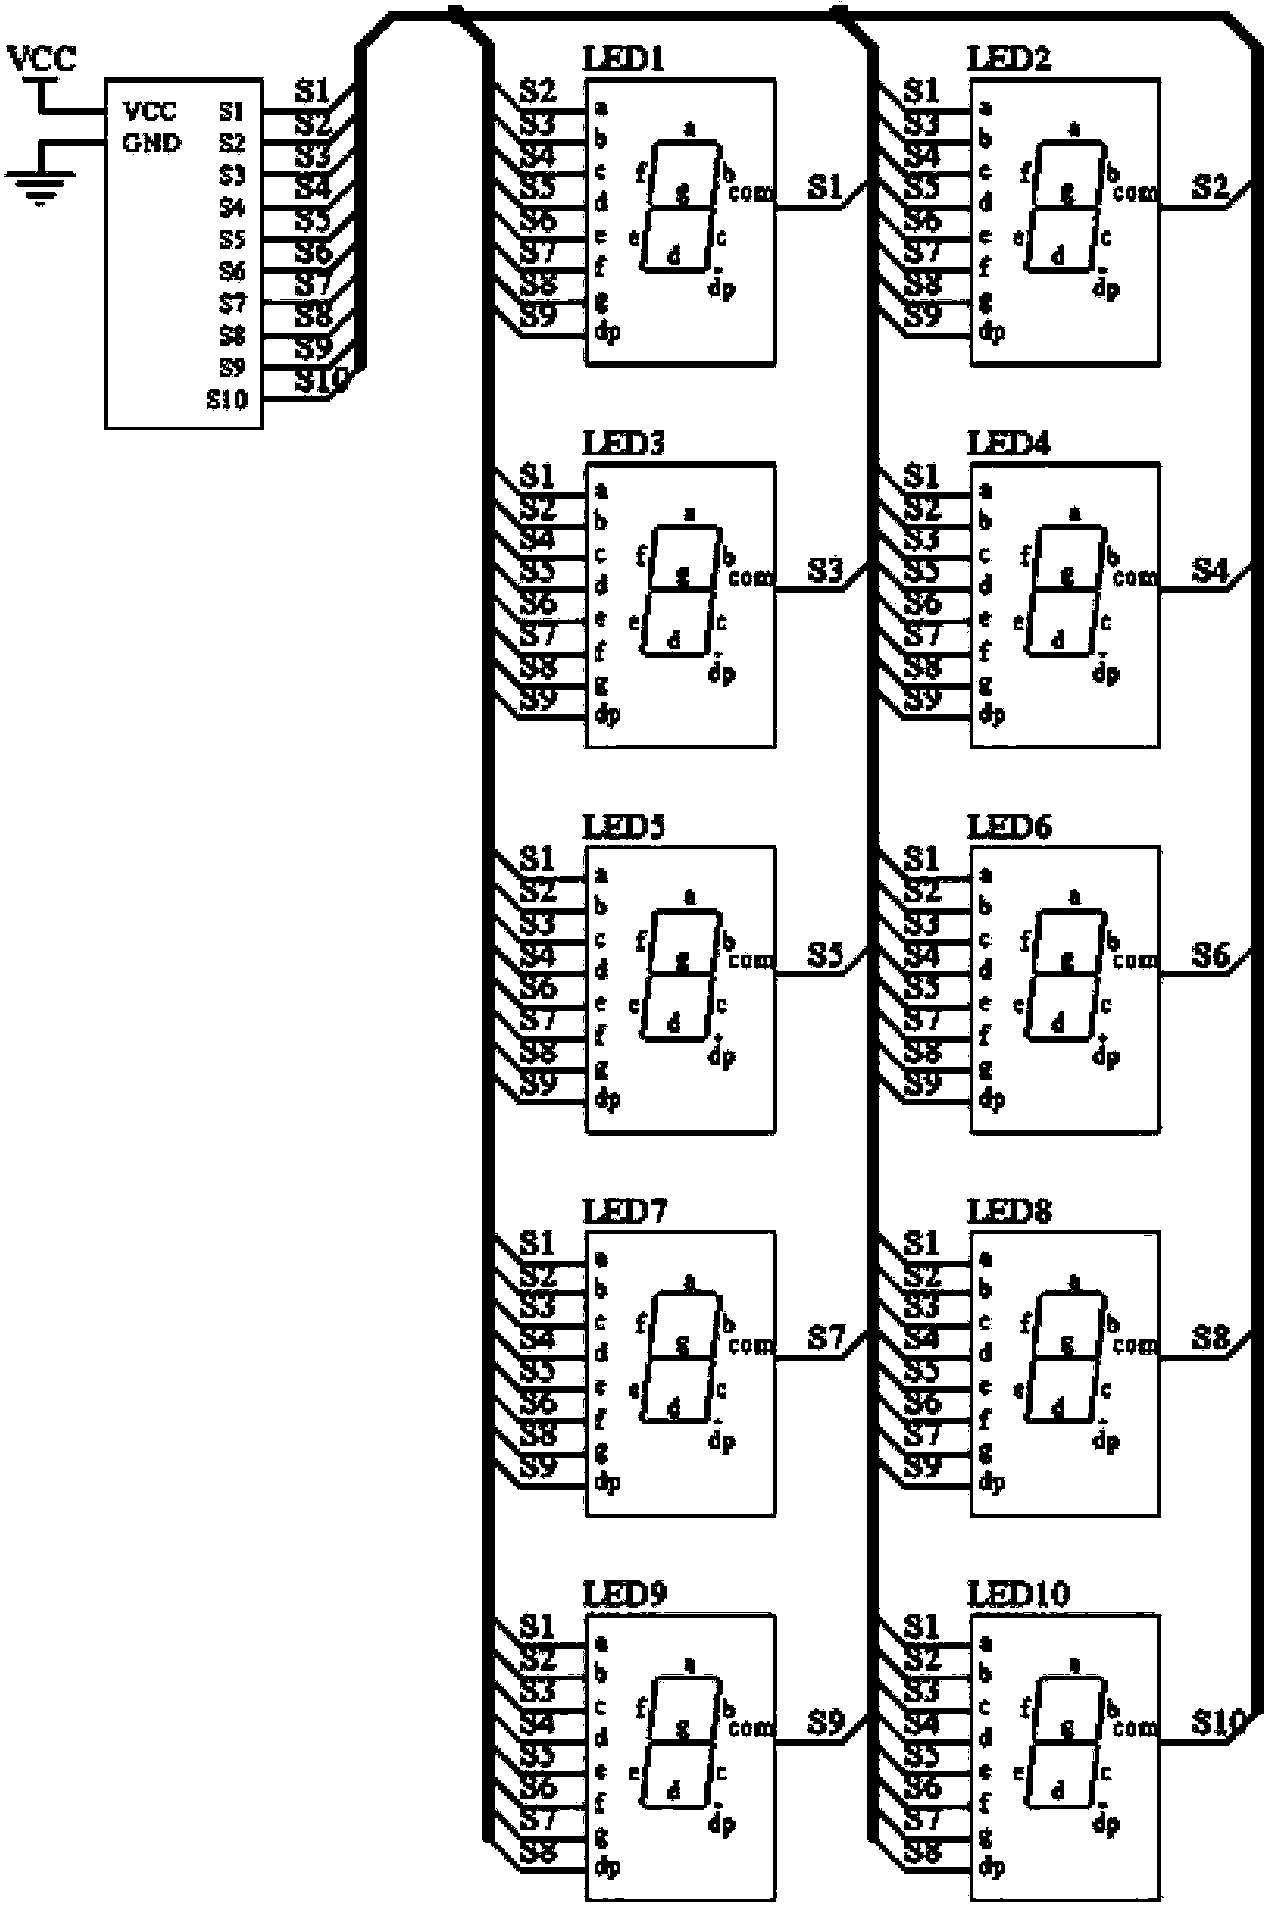 Device for button scanning under multi-digit nixie tube driving environment and control method